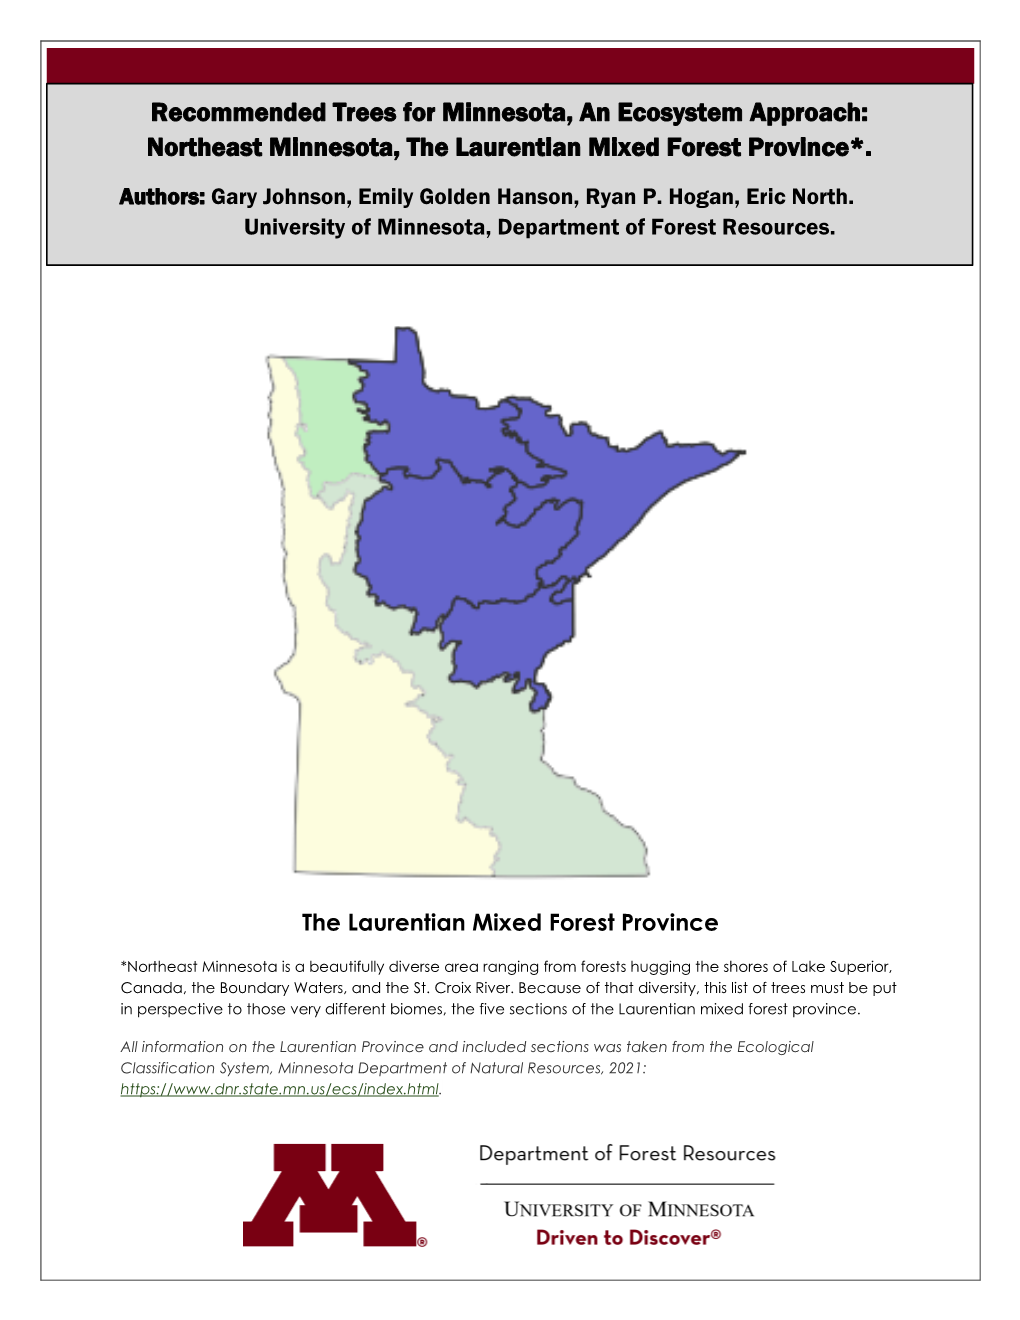 Recommended Trees for Minnesota, an Ecosystem Approach: Northeast Minnesota, the Laurentian Mixed Forest Province*